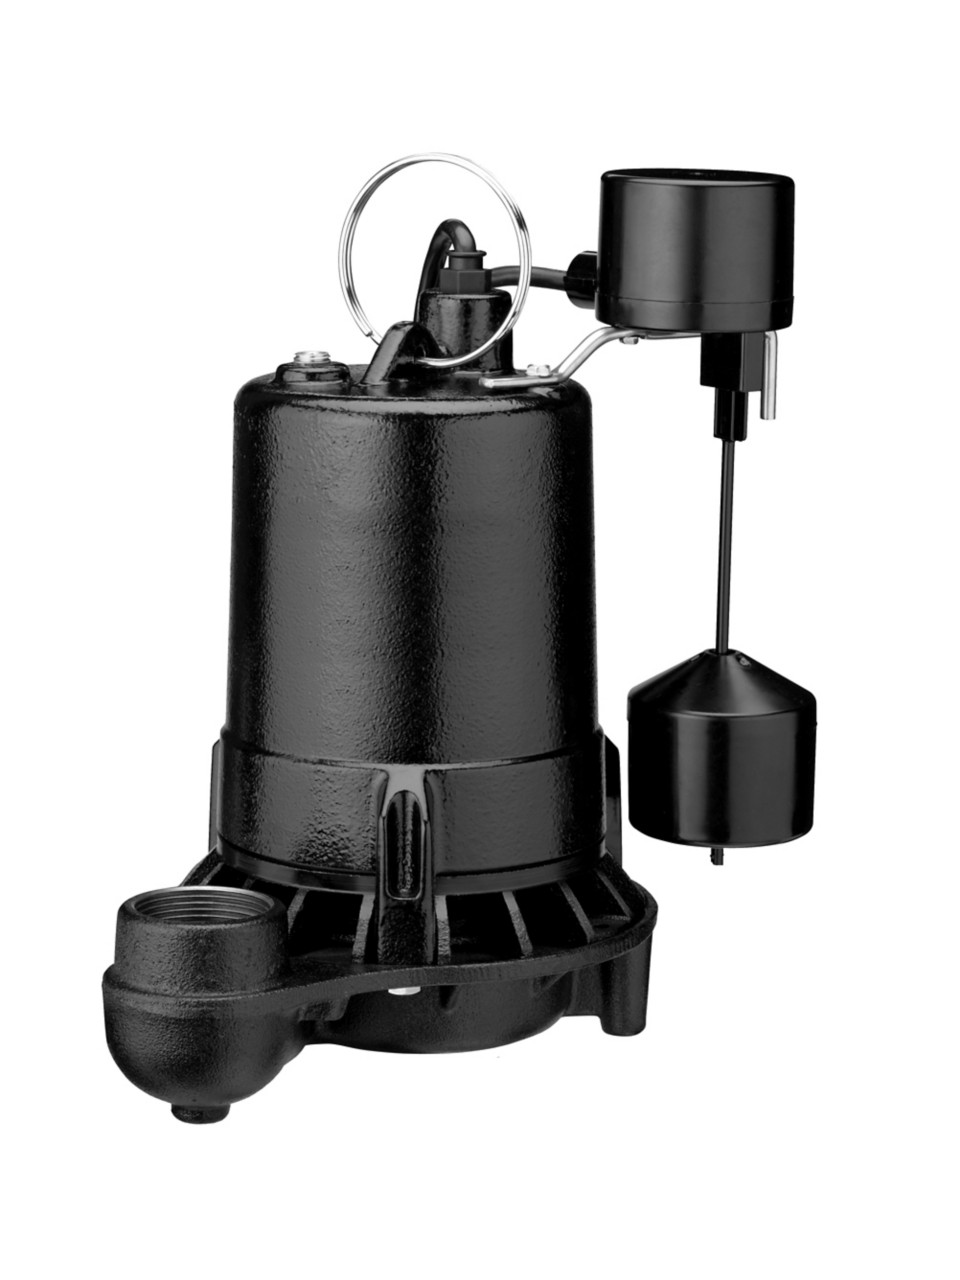 This is an unbranded FlotecPro sump pump